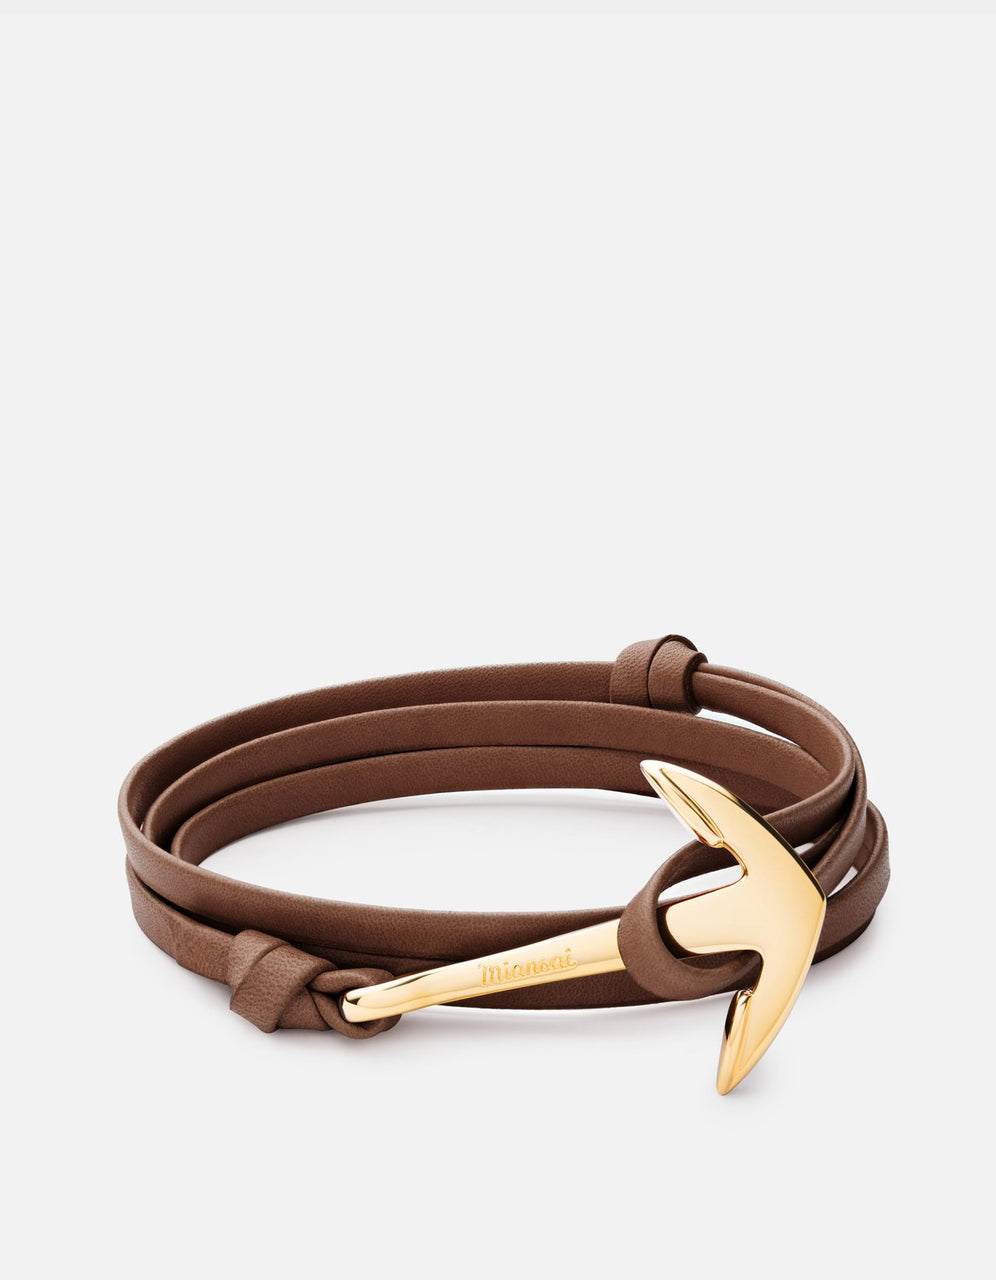 Anchor on Leather Bracelet, Gold Plated, Brown